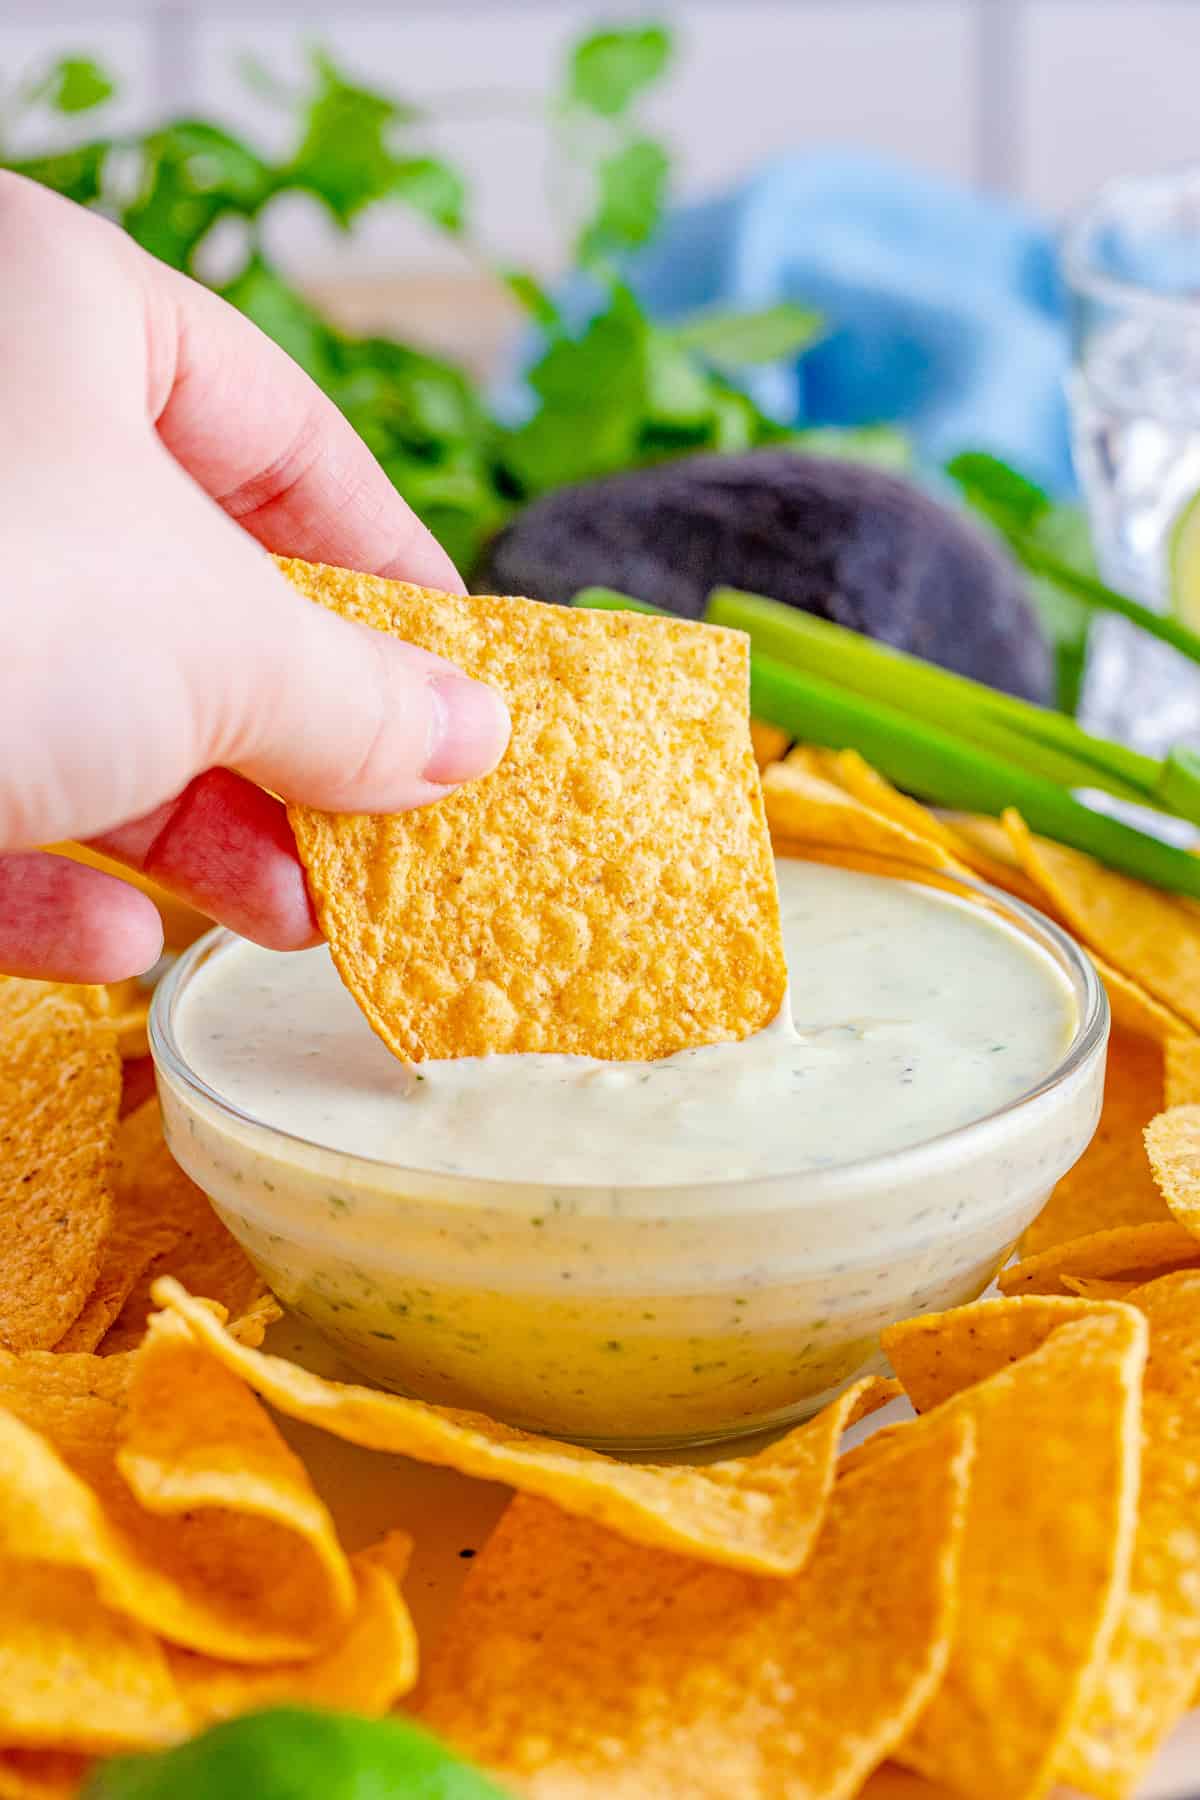 Hand dipping a chip into the Avocado Ranch.